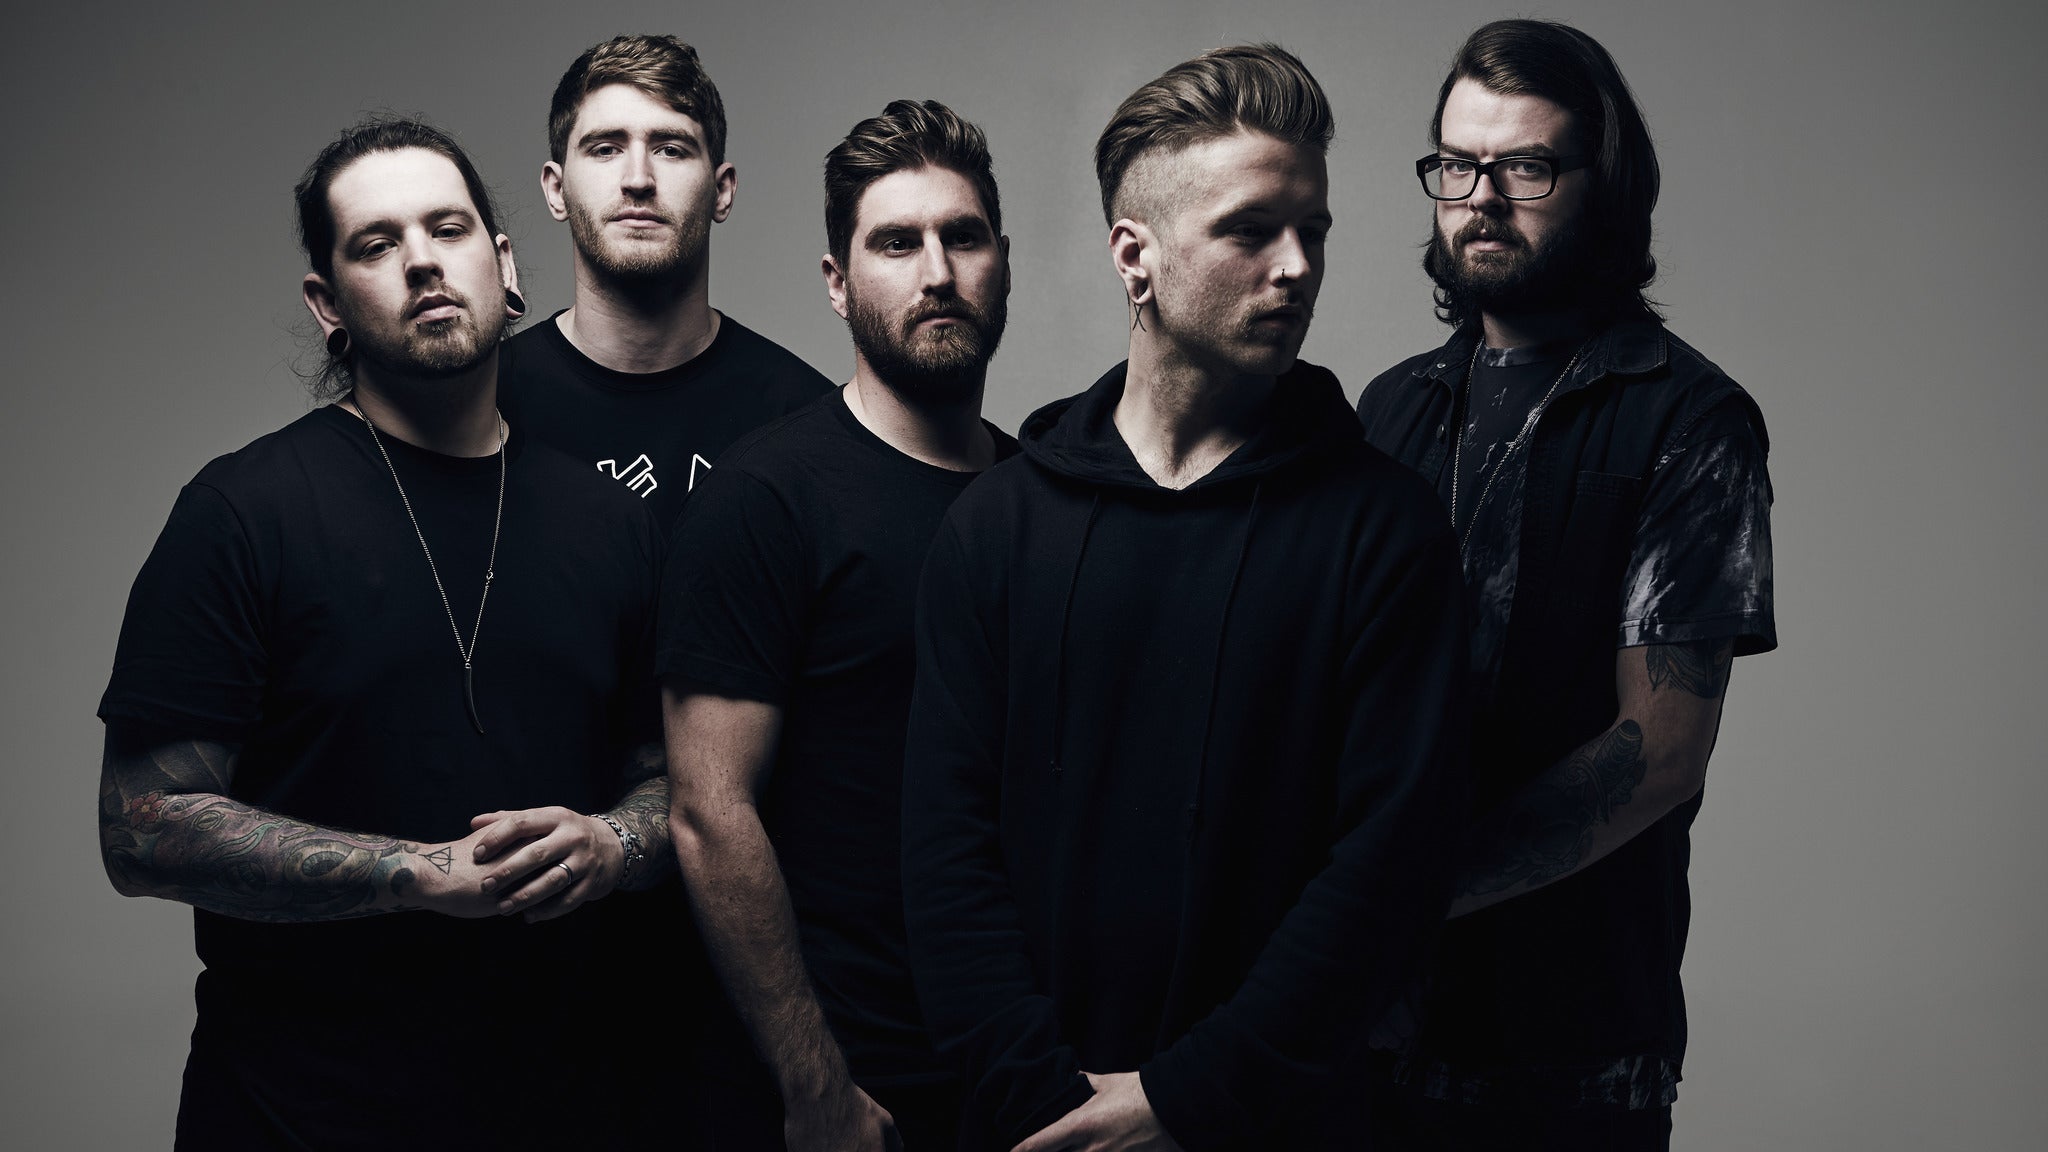 Bury Tomorrow - The Seventh Sun Tour in New York promo photo for Spotify presale offer code